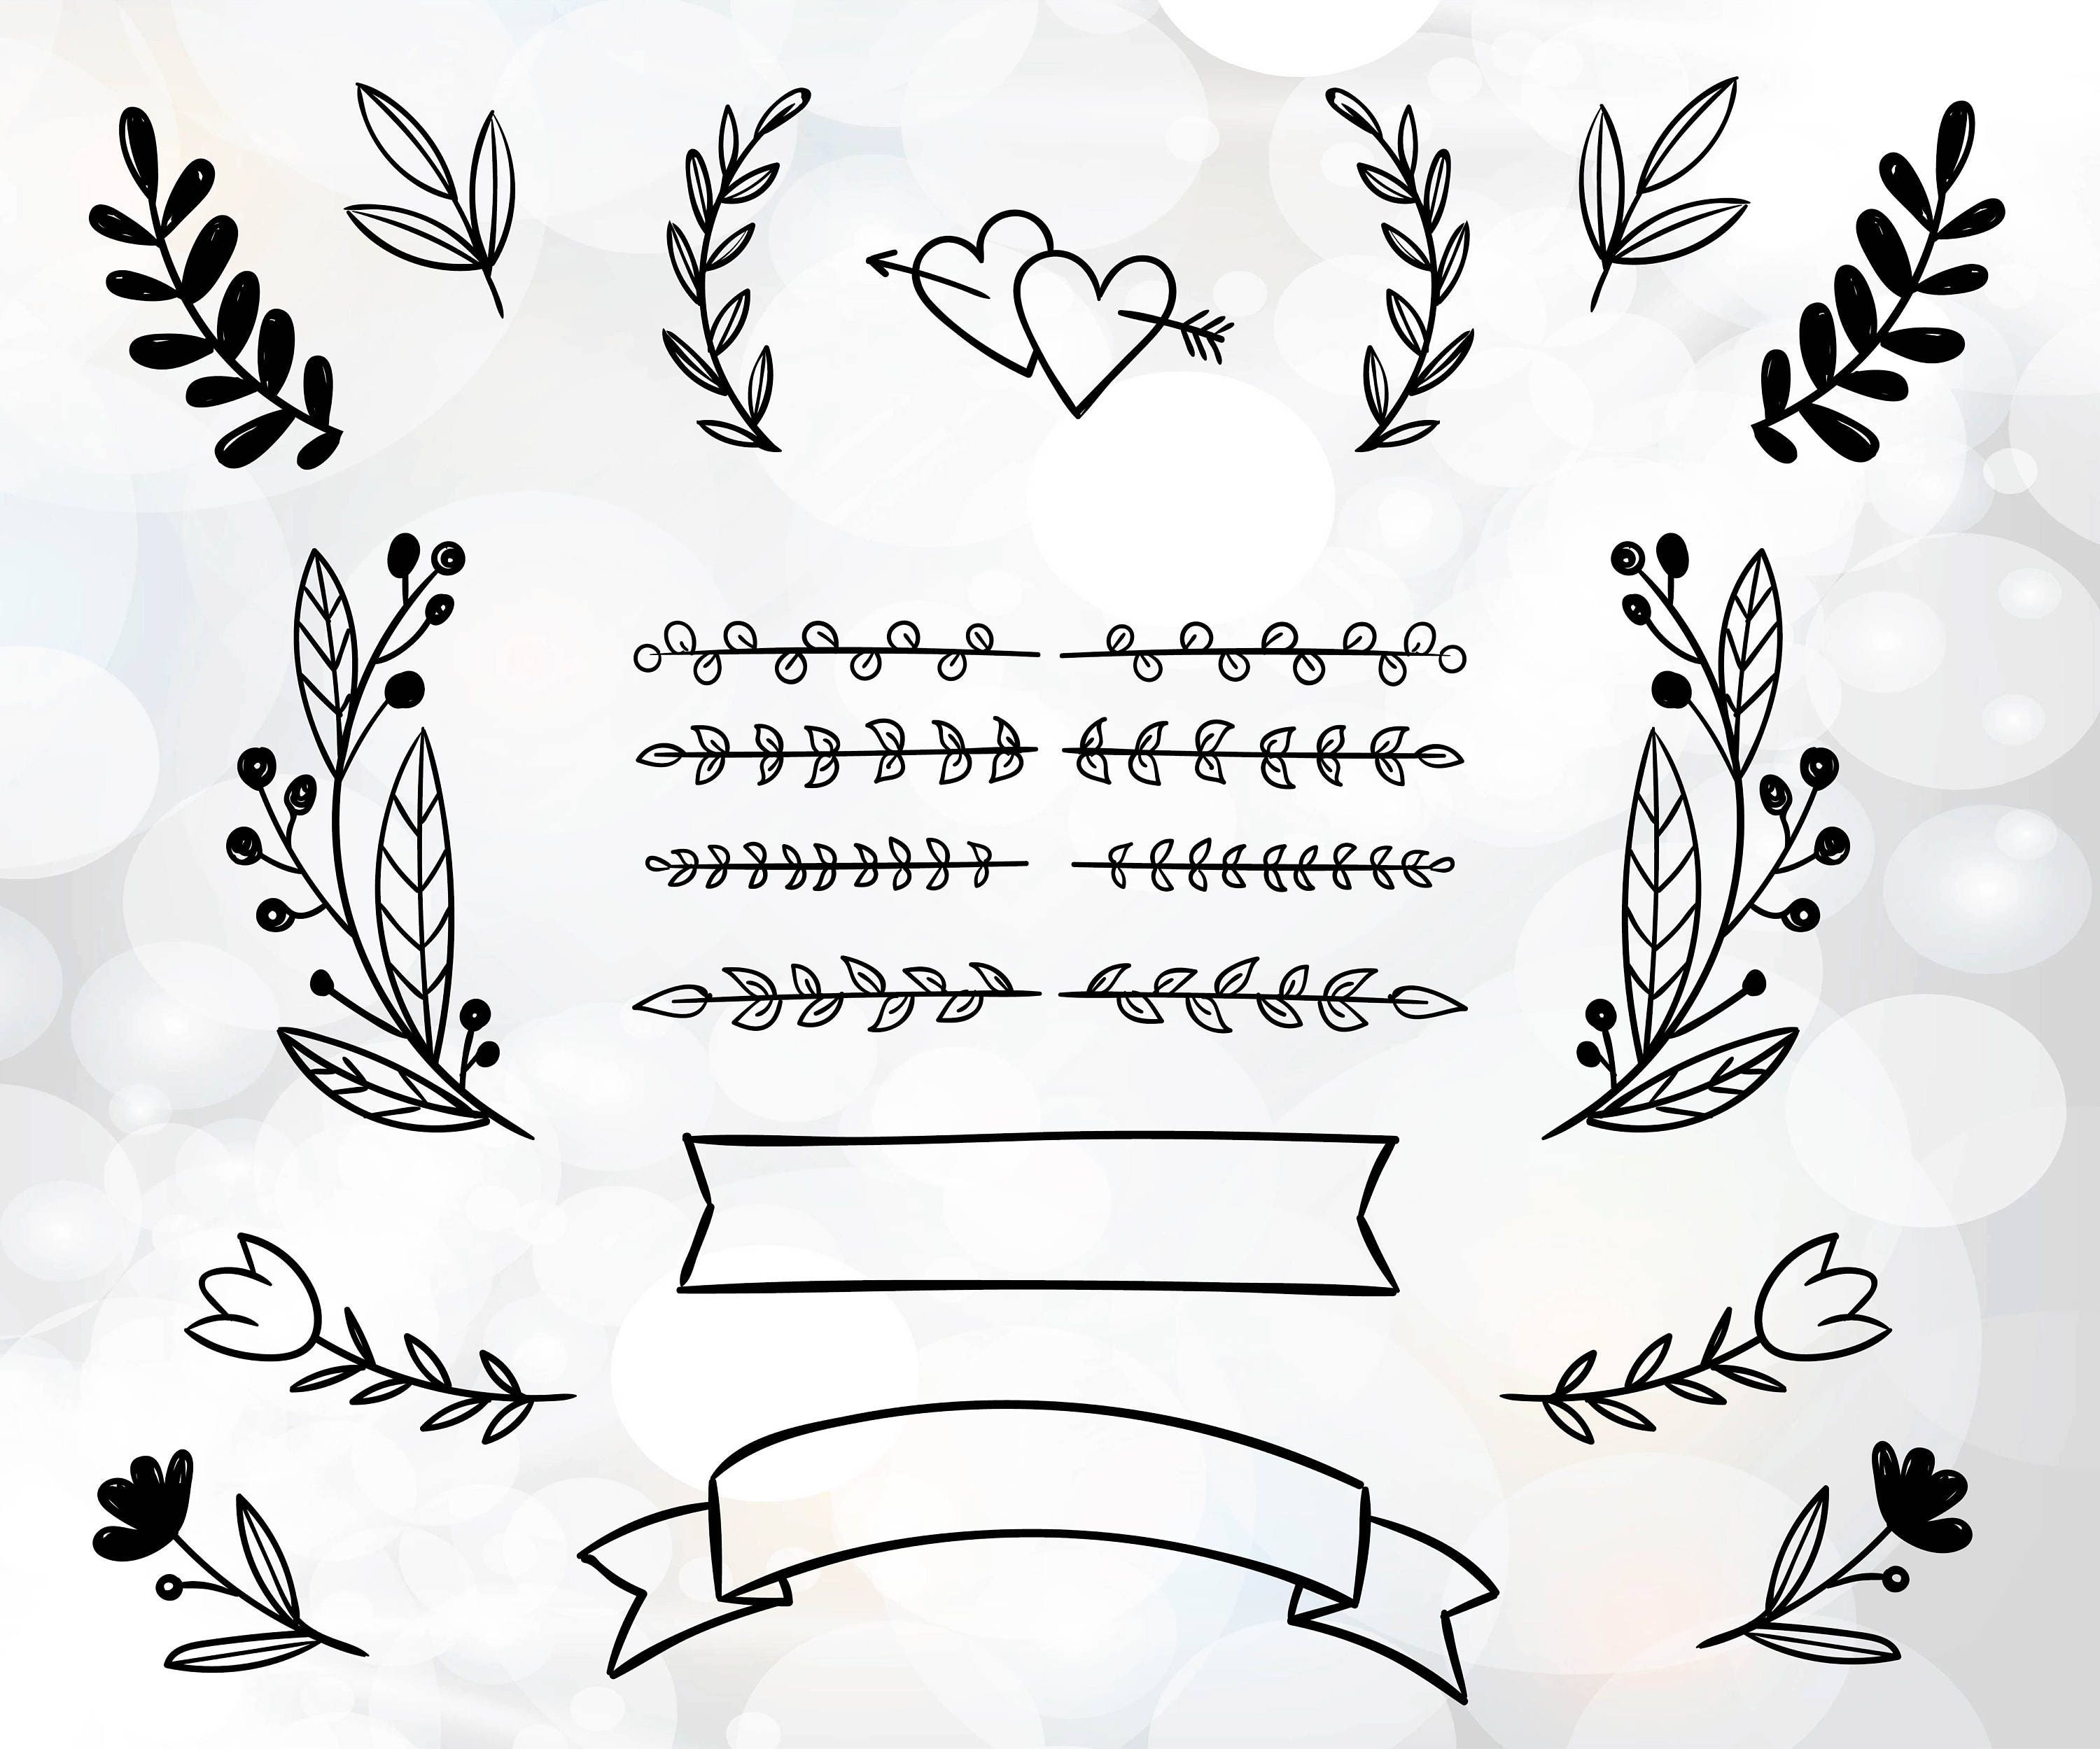 Download Free Svg Wedding "Wedding" With Flower File For Cricut ...